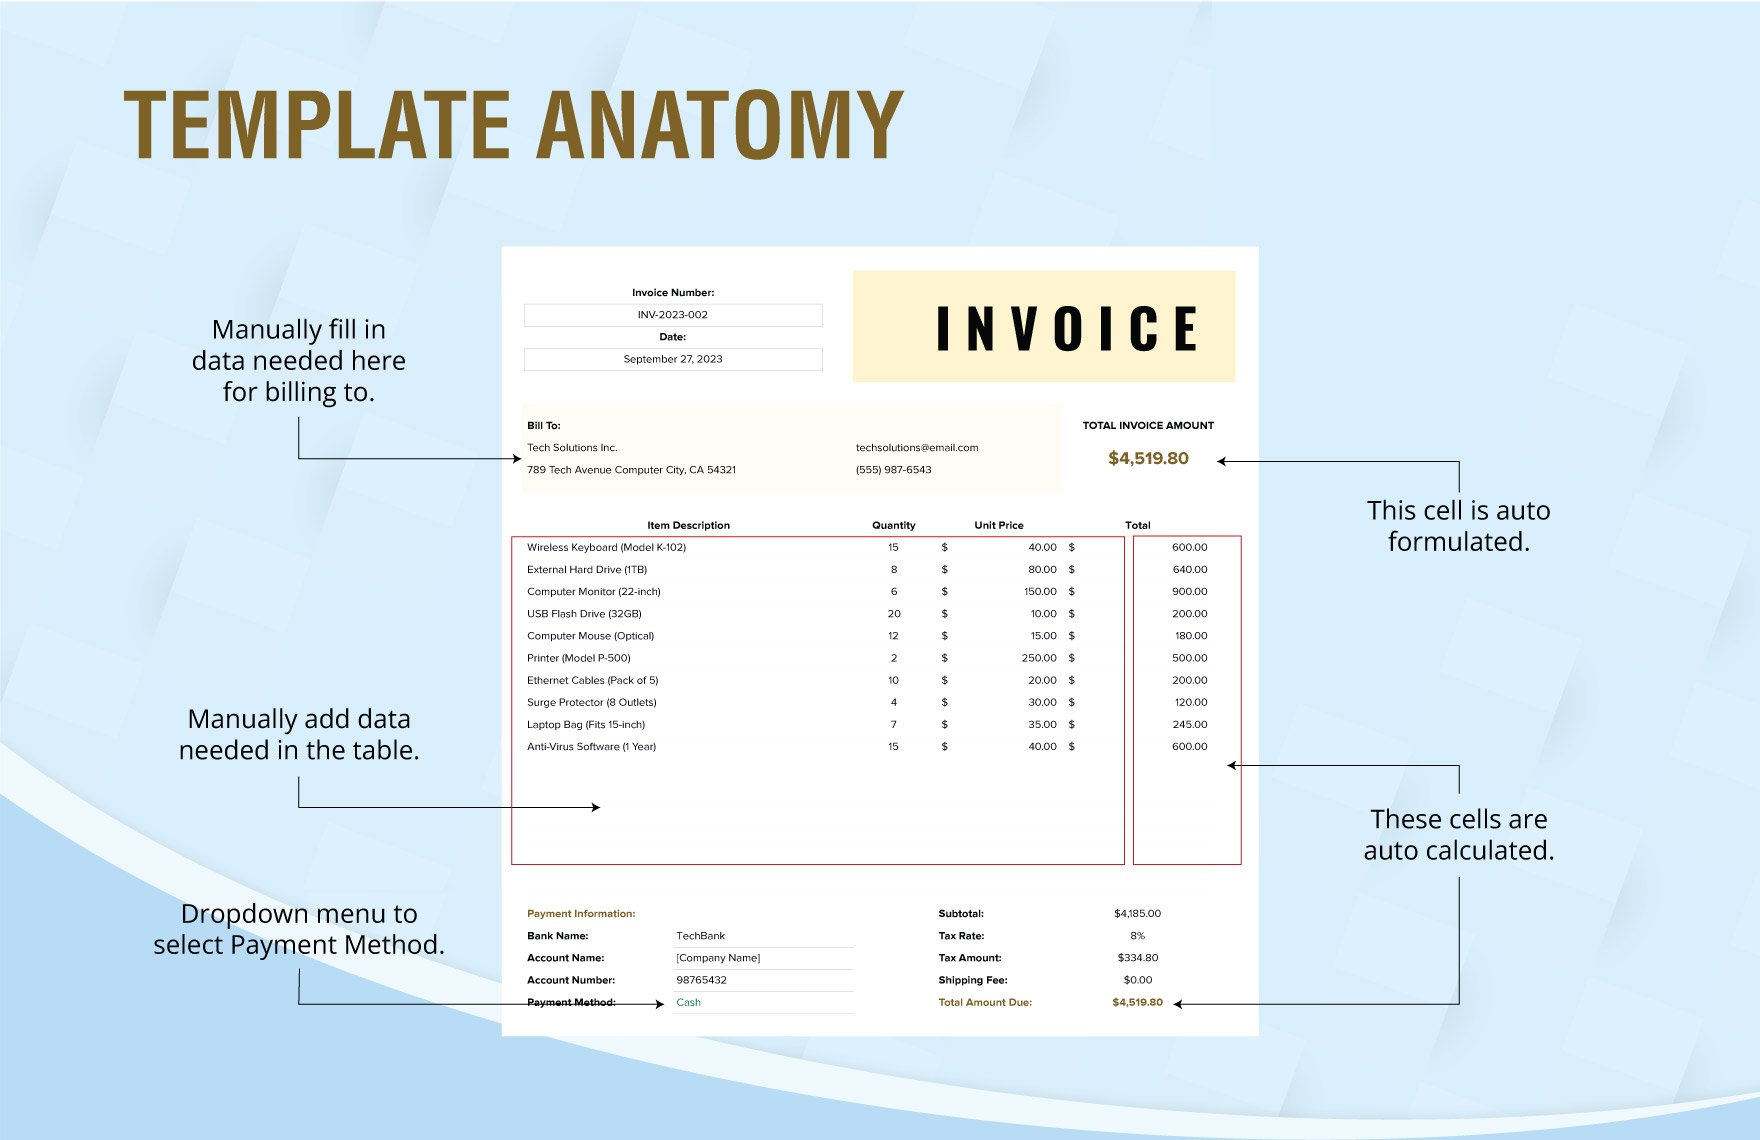 Printable, Downloadable Invoice Template